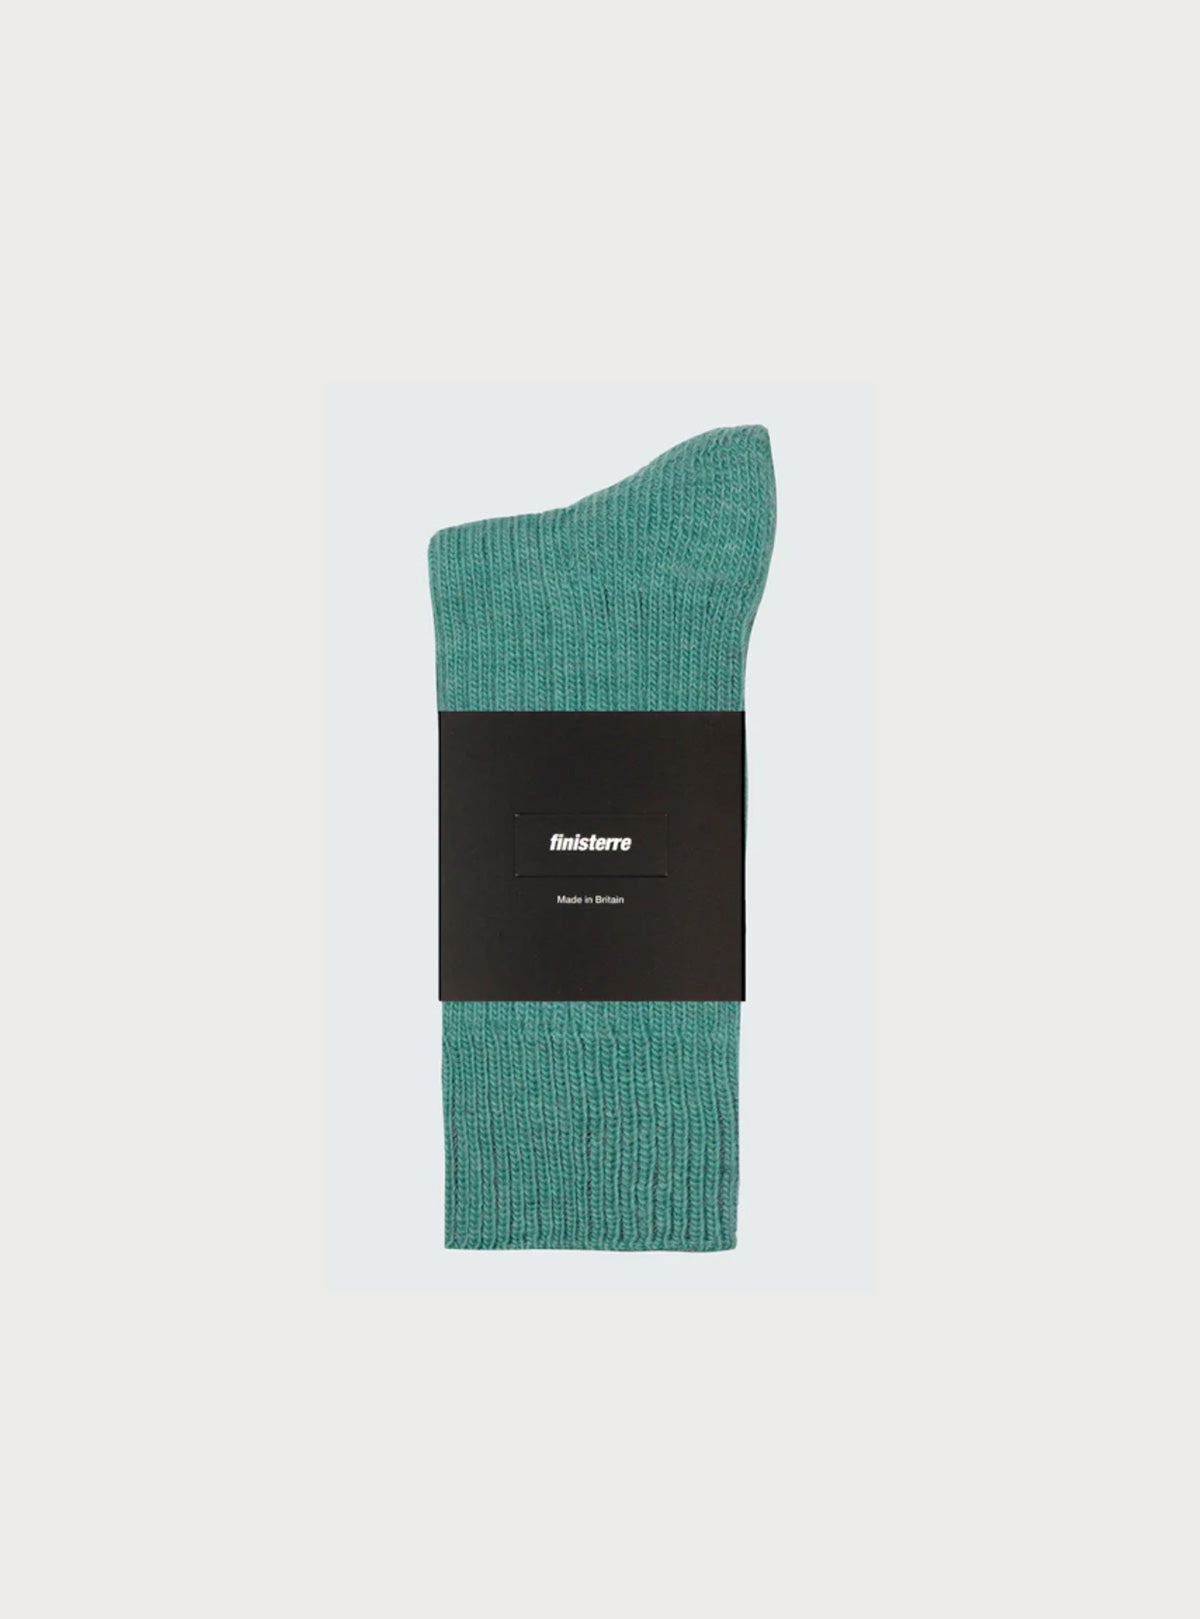 Finisterre - Ribbed Sock - Seaglass